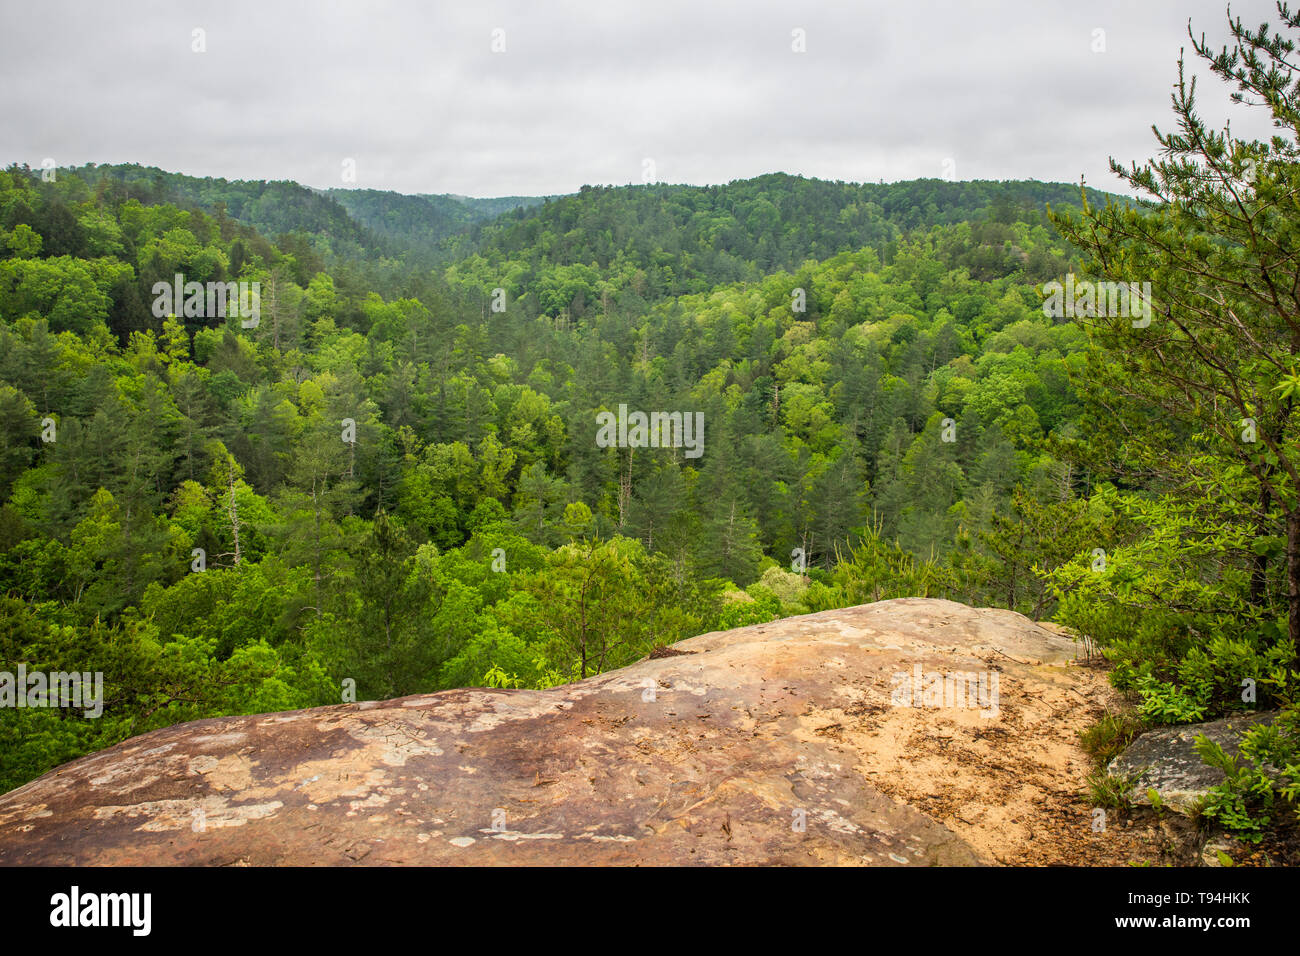 Scenes from the Red River Gorge, Kentucky, USA. Stock Photo